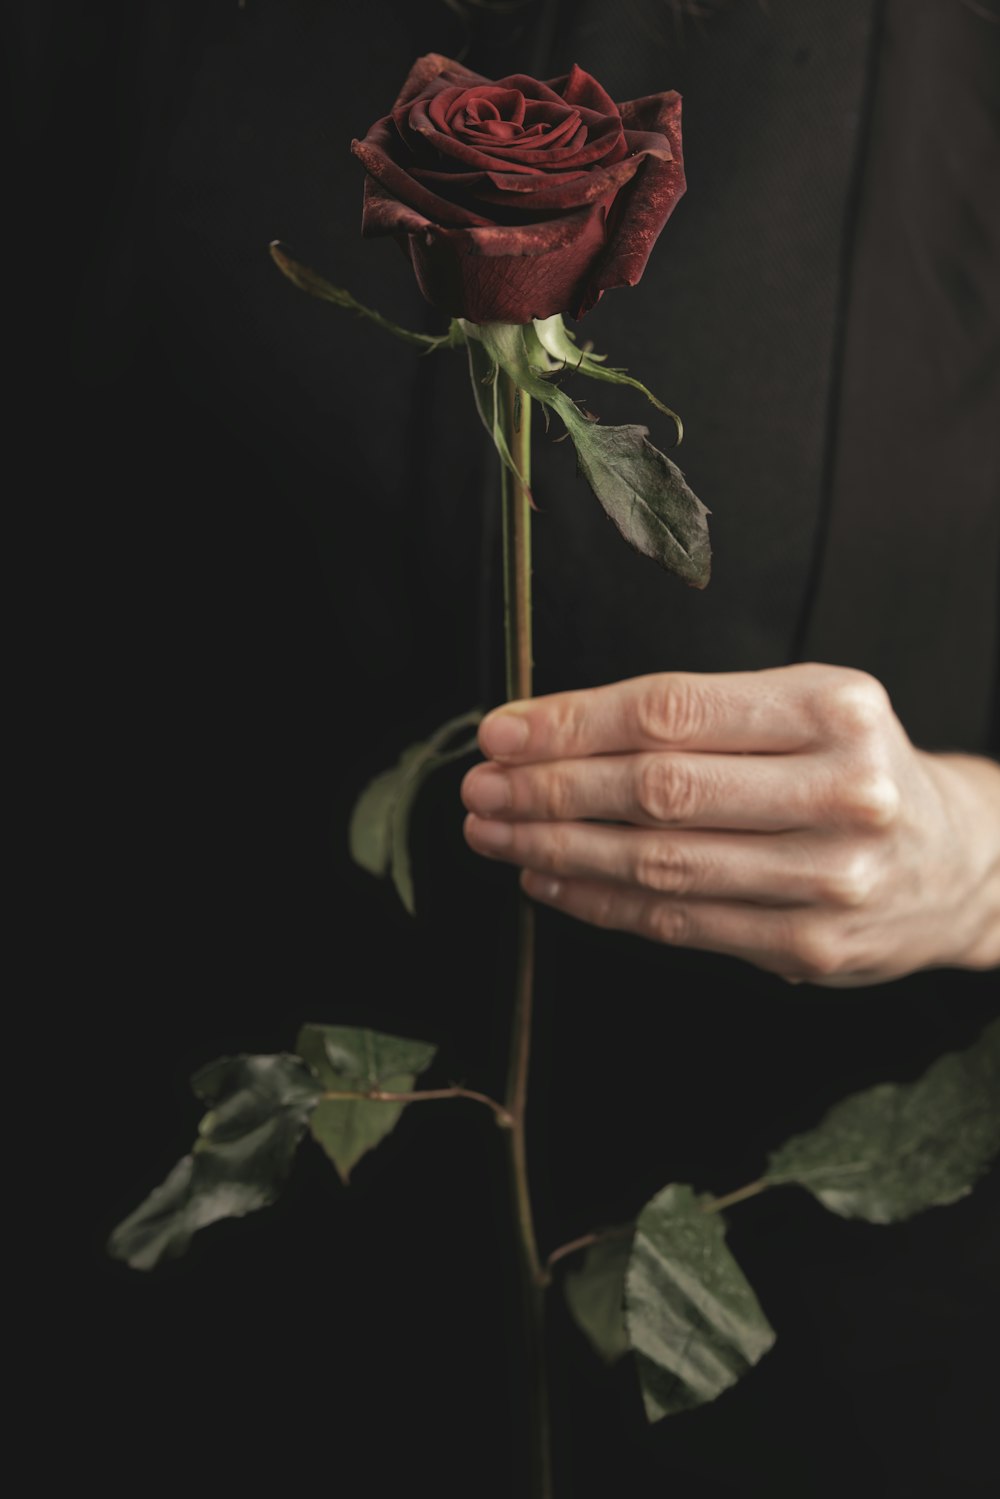 350+ Romantic Rose Pictures [HQ] | Download Free Images on Unsplash